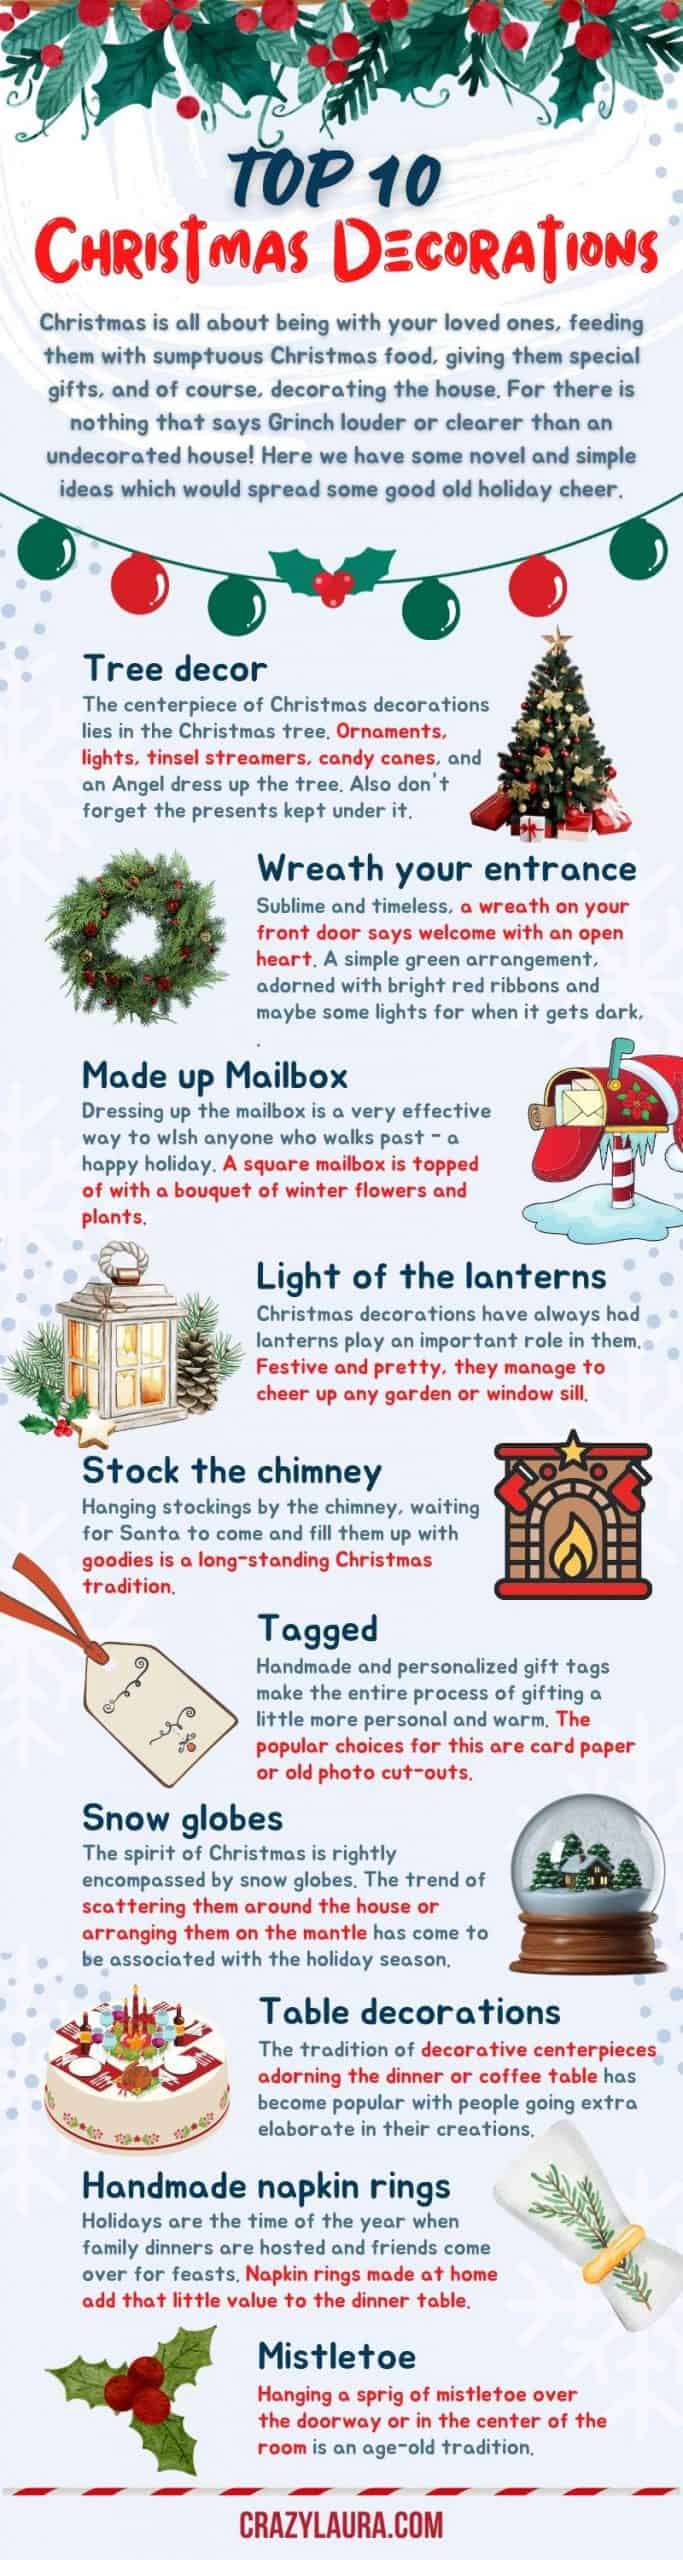 Top Christmas Decorations Infographic - CrazyLaura